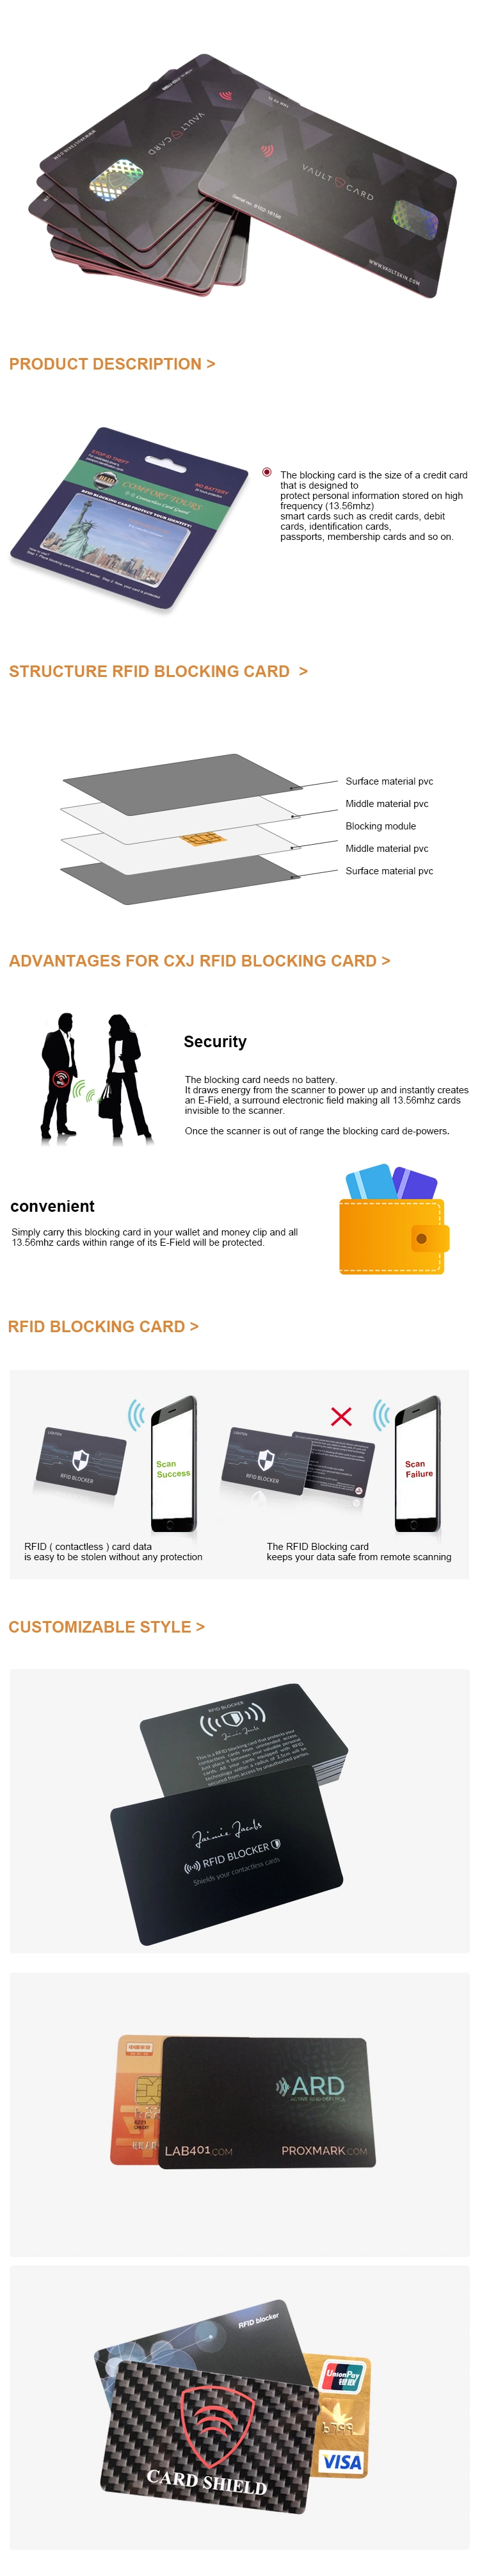 Factory Price  Credit  Card  Protector  RFID  NFC  Blocking  Card